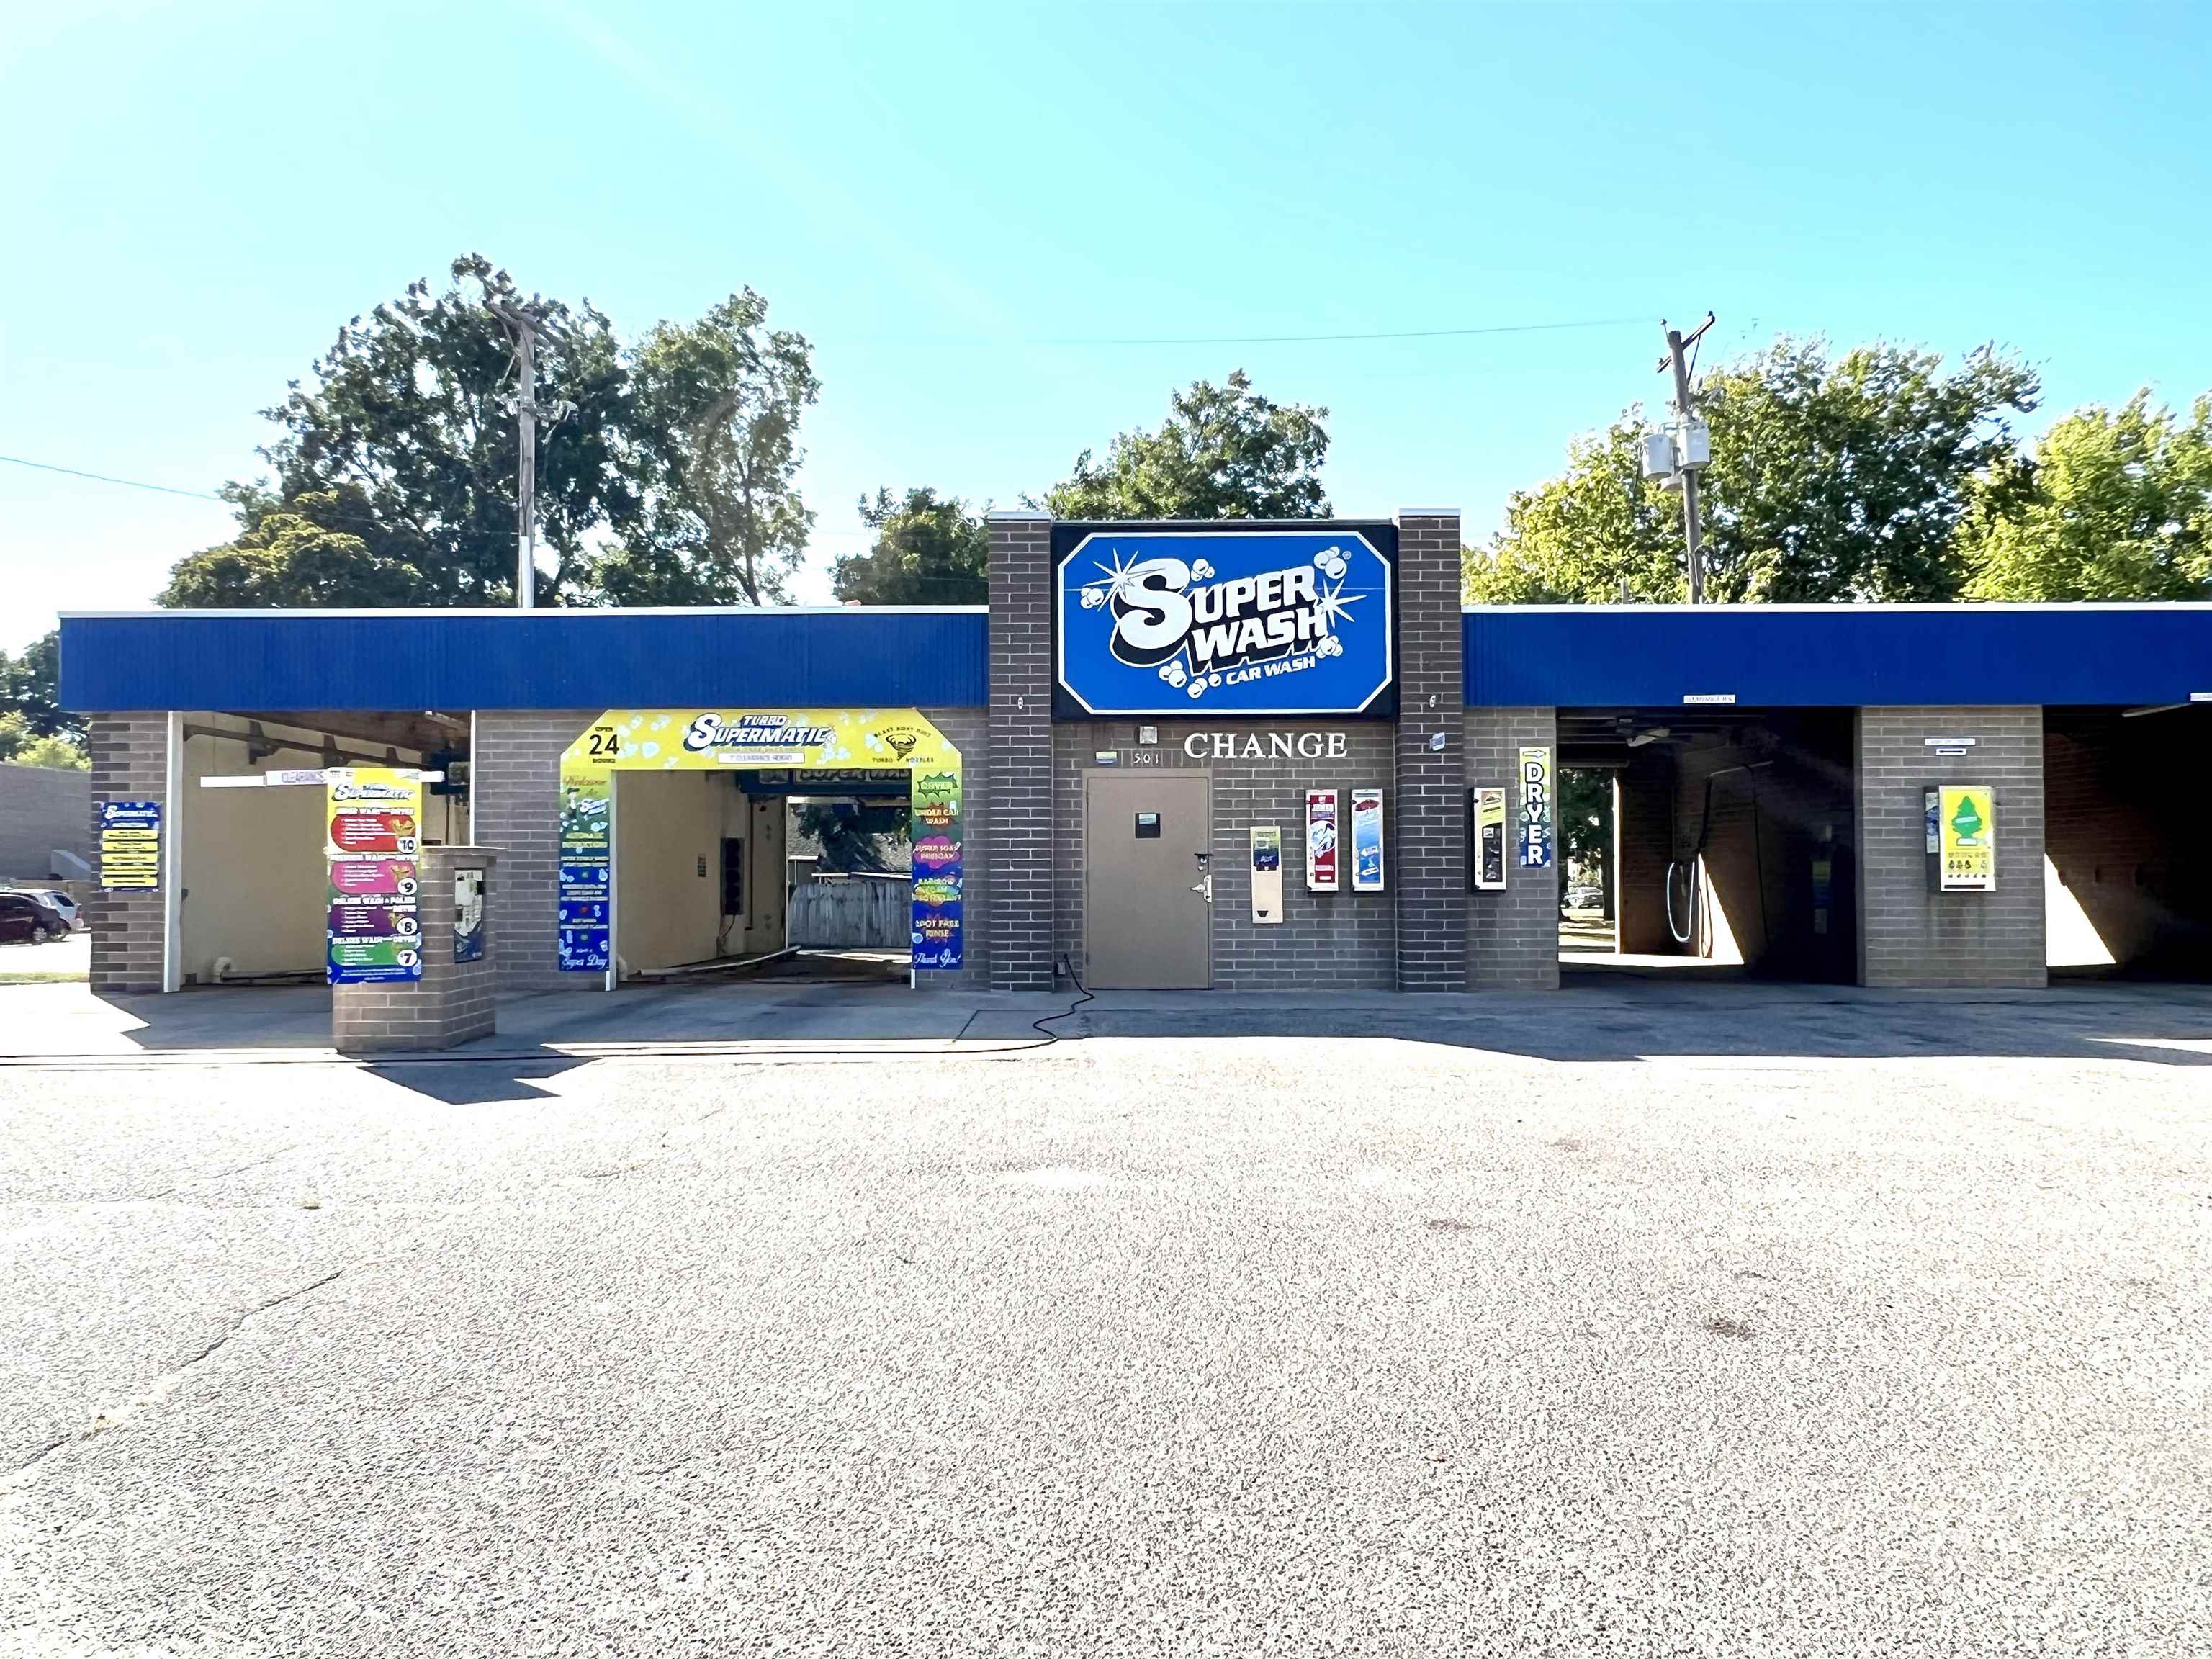 Looking for a business opportunity? Check out the options for  this listing.  Located in the heart of Arkansas City on Summit.  This is prime Real Estate!!! Established car wash for sale.  Property features 2 Touchless Automatic and 2 manual self-serve wash bays.  Three vacuum and 1 shampoo station.  The car wash will not include the Super Wash or Supermatic trademarked name. All Super Wash signs must be removed at the time of sale. The car wash equipment will be included if buyers are going to continue to operate as a car wash for the total price of $1.00. If buyers are changing business from a car wash sellers would like to keep some of the equipment. Call listing agent for more information and to set up a showing time.